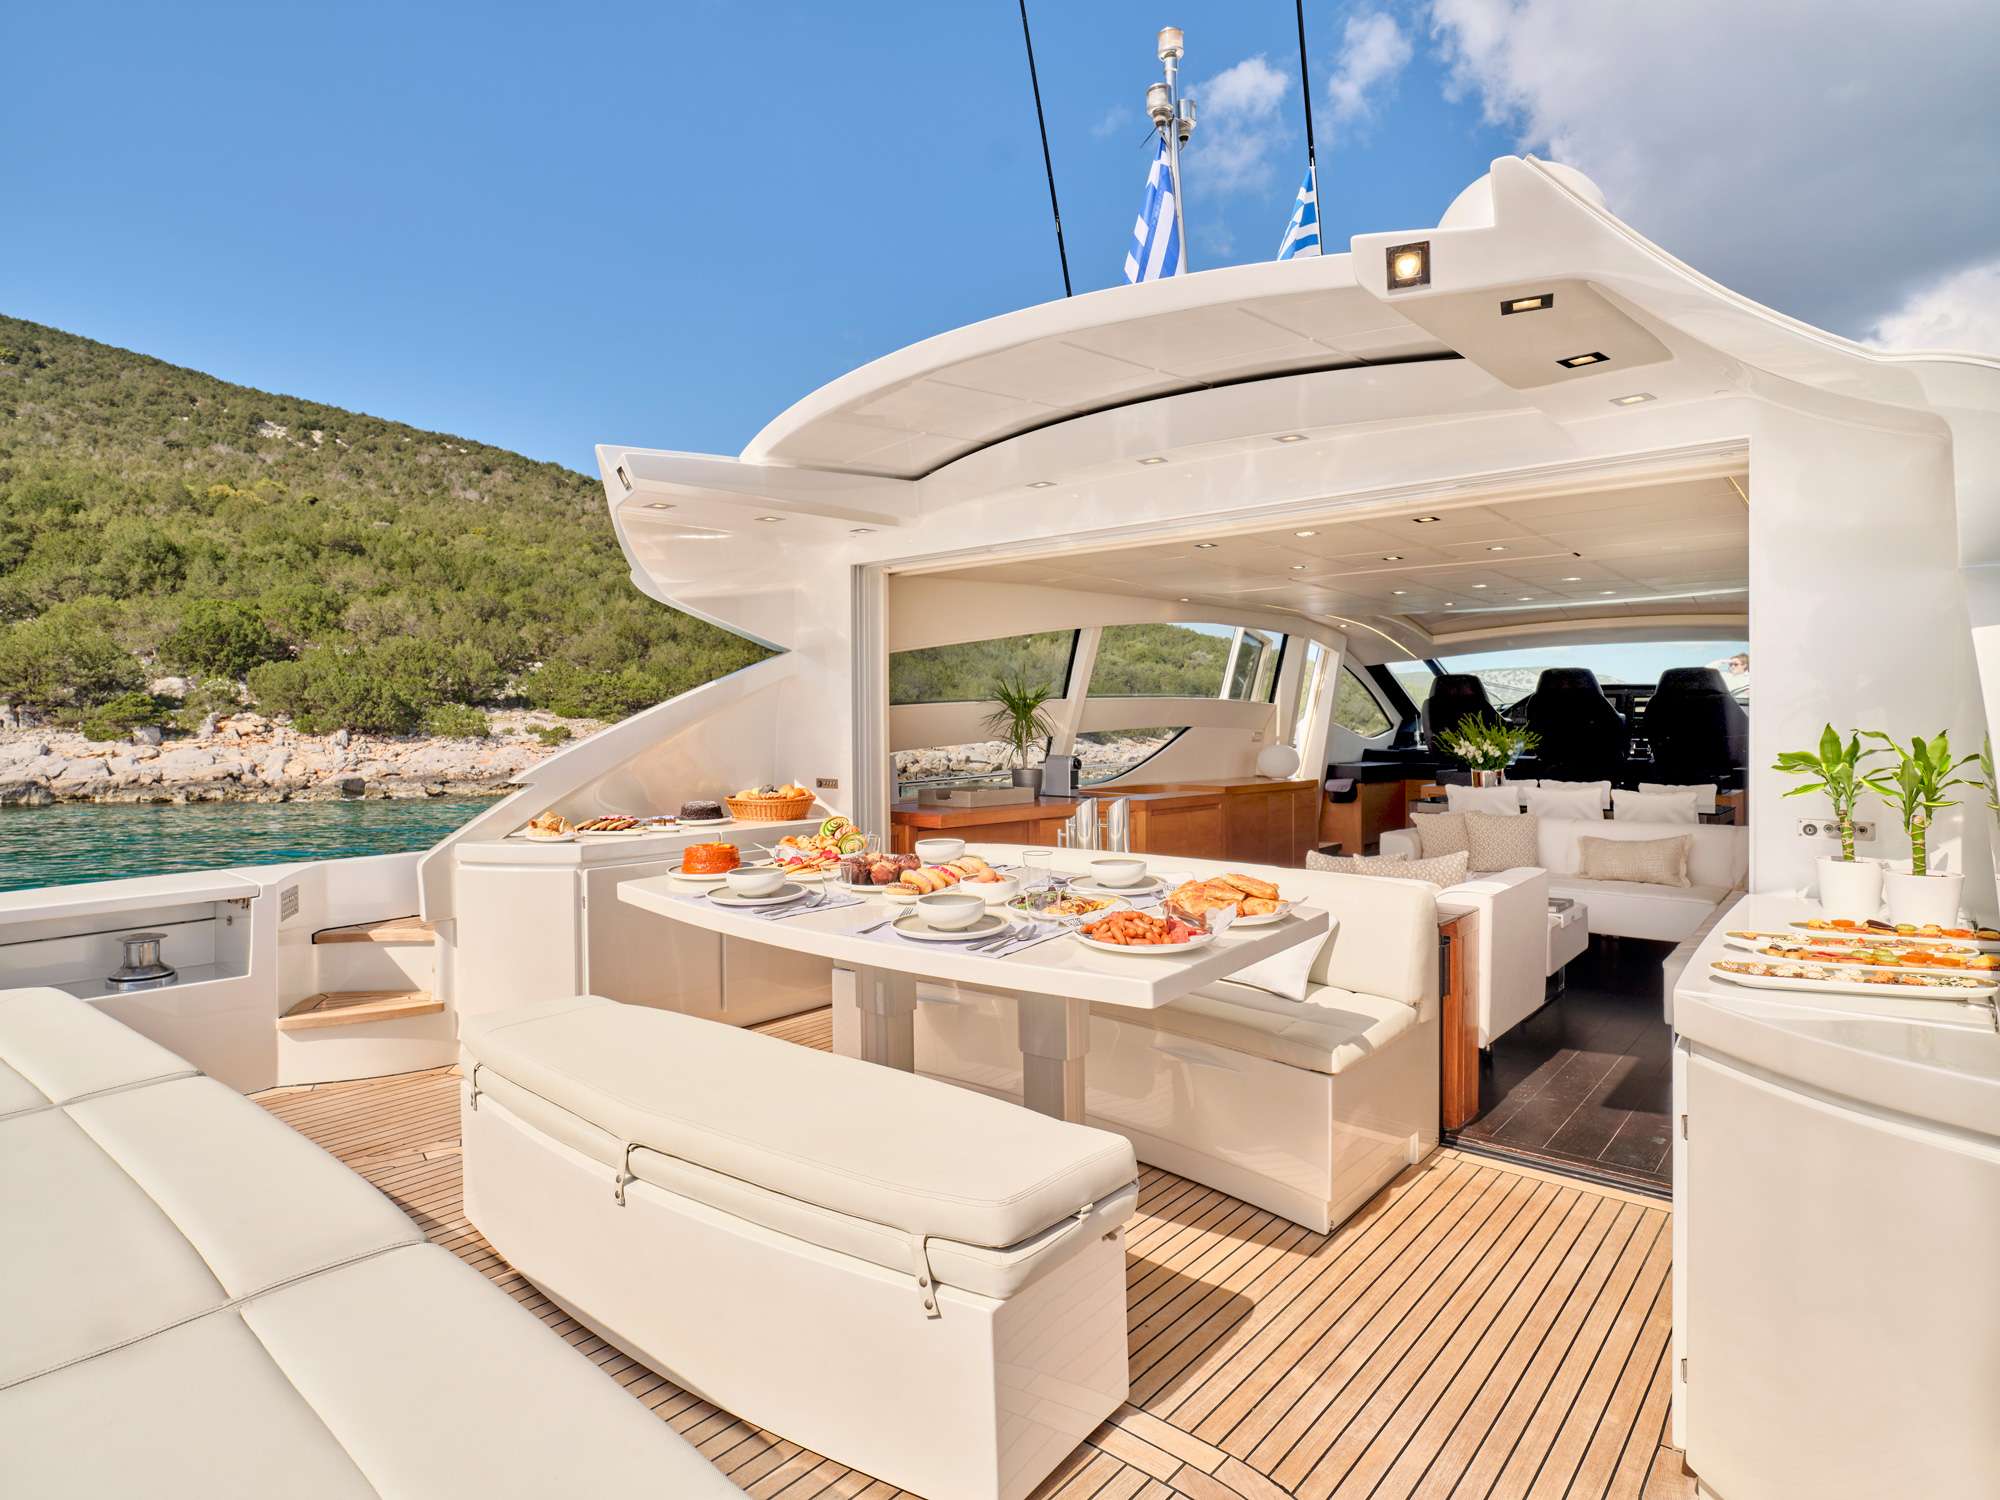 FOR EVER Yacht Charter - Aft deck